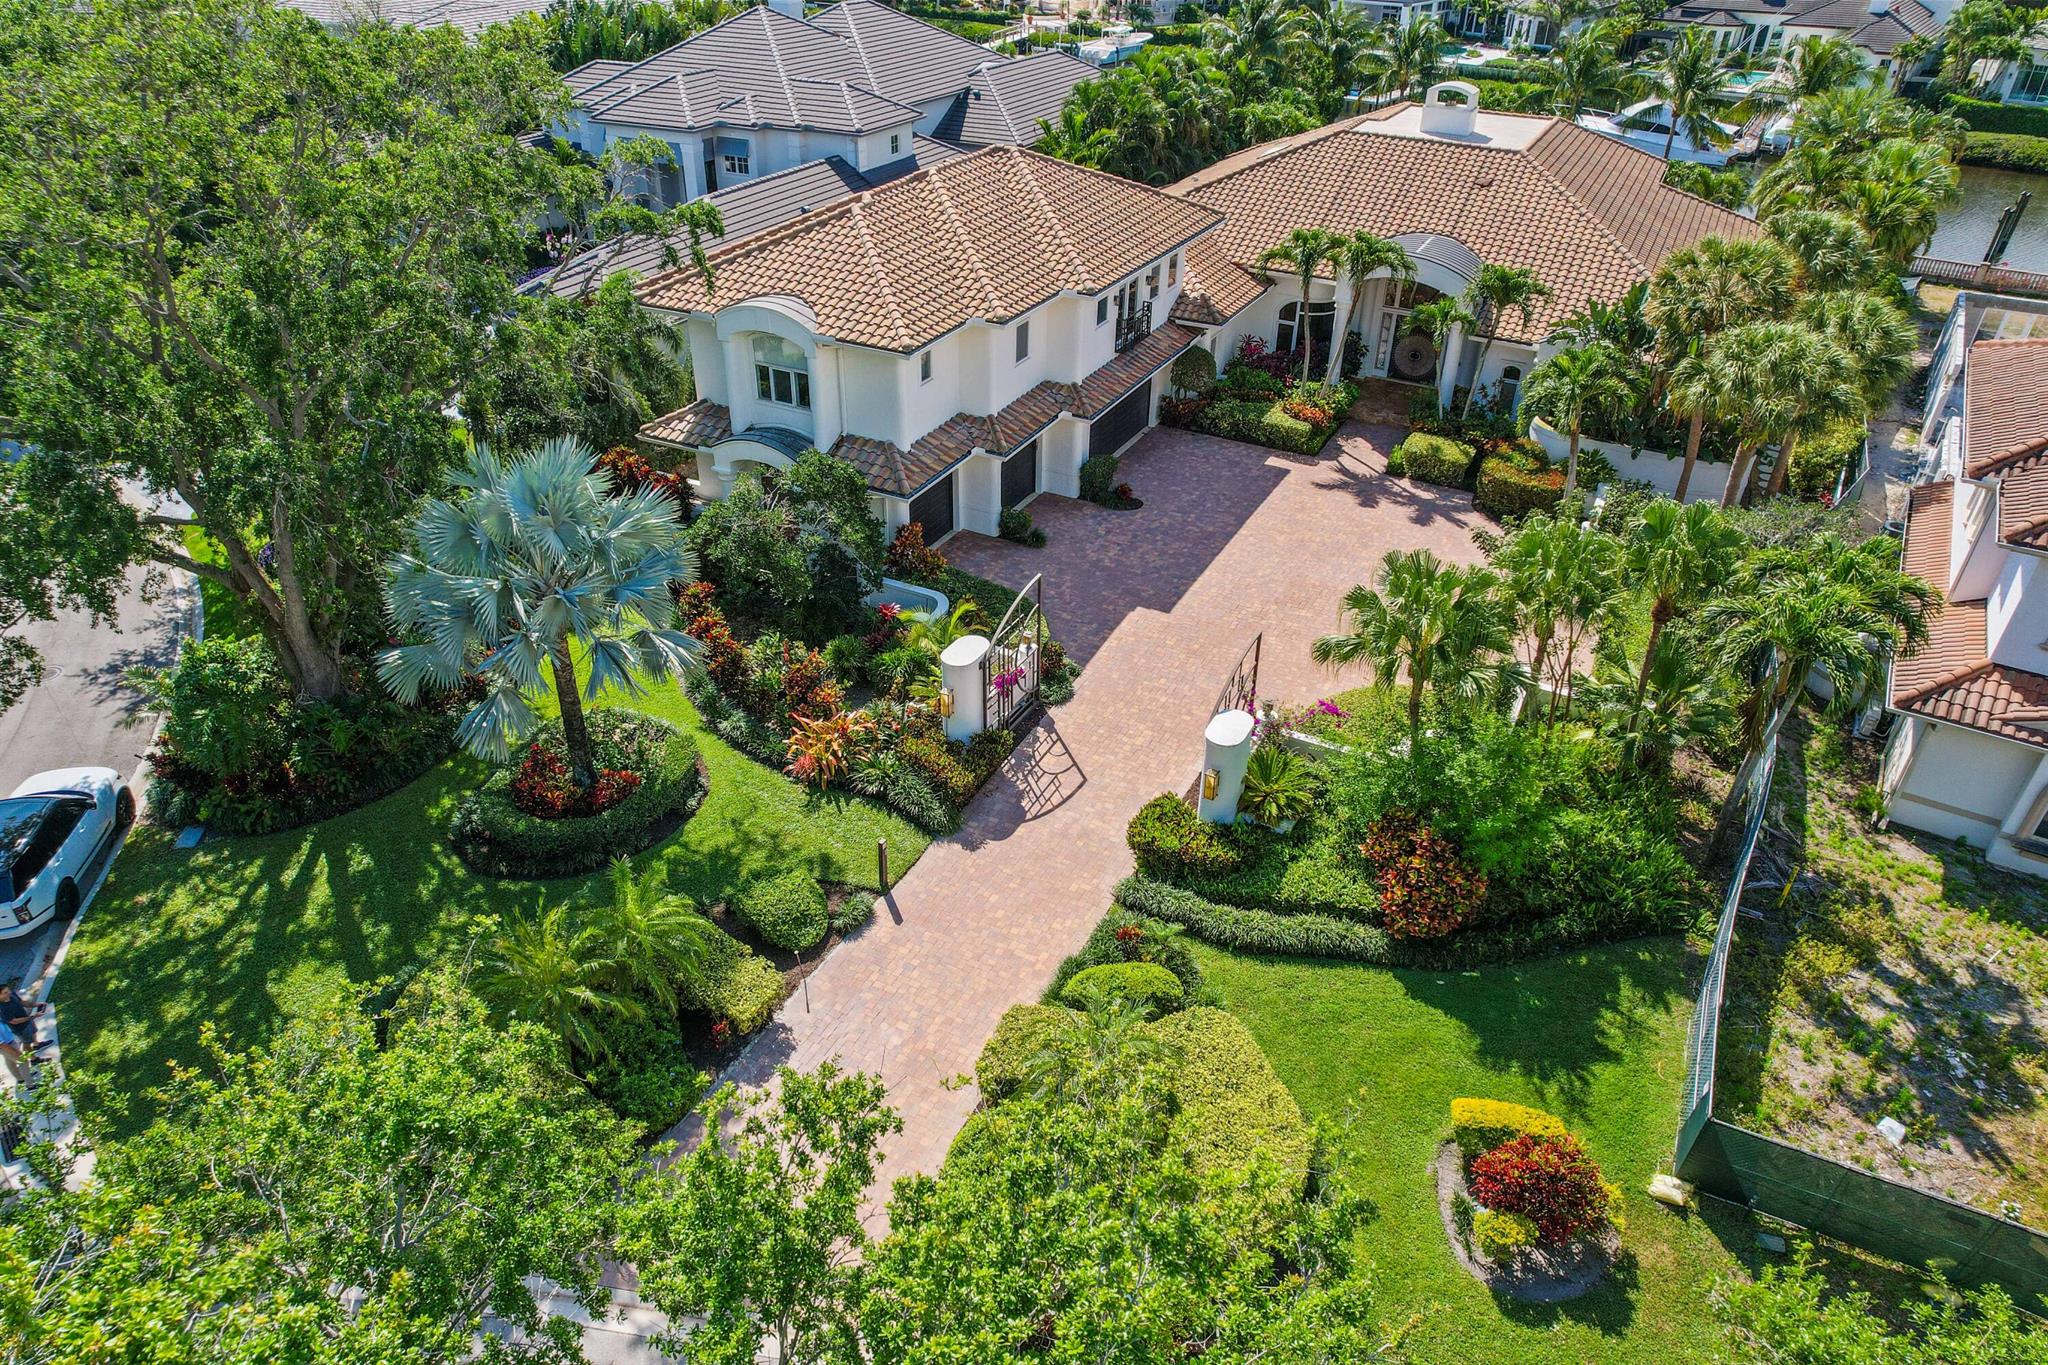 Welcome to your slice of paradise in Admirals Cove!Immerse yourself in the lap of luxury along the enchanting oak-lined streets of Admirals Cove, where this waterfront marvel awaits. With its coveted Southern Exposure and an impressive 119 feet of water frontage, this gem promises a lifestyle of unparalleled bliss.Picture yourself just moments away from the Intracoastal Waterway, nestled on a sprawling .62-acre estate lot primed for either a stunning renovation or the creation of your dream home. Opportunities as extraordinary as this are a rare find within the exclusive confines of Jupiter's most sought-after waterfront community, but now, the chance to indulge in the finest things in life is within your grasp. Perched on one of Admirals Cove's most esteemed streets, this concrete block sanctuary boasts 7 bedrooms, 7.1 bathrooms, and nearly 6300 square feet of luxuriously air-conditioned living space. Step outside and be greeted by the inviting beach entry pool, setting the stage for outdoor gatherings amidst lush surroundings. Revel in the pleasures of outdoor living with a covered summer kitchen, a delightful putting green, and a Trex dock capable of accommodating an 85-foot yacht.
But that's just the beginning of the extravagance that awaits within The Club at Admirals Cove. Indulge in the club lifestyle with access to 45-holes of championship golf, a premier tennis club, pickleball courts, state-of-the-art fitness facilities, and a pampering full-service spa and salon. Delight your palate with a choice of seven distinct dining options, explore the marina's 54-slip floating dock, and let your little ones discover endless fun at the kids' club. With an array of resort-style pools beckoning, every day feels like a vacation in this enclave of opulence.
Embark on a journey of refined living where every detail exudes sophistication and grandeur. Seize this extraordinary opportunity to join the ranks of those who relish in the pinnacle of luxury living.
Unlock the gates to an unparalleled lifestyle today. Don't miss out on this exclusive opportunity.

(Please note: $300k Non-Refundable Initiation Fee, $55k Annual Dues Required)